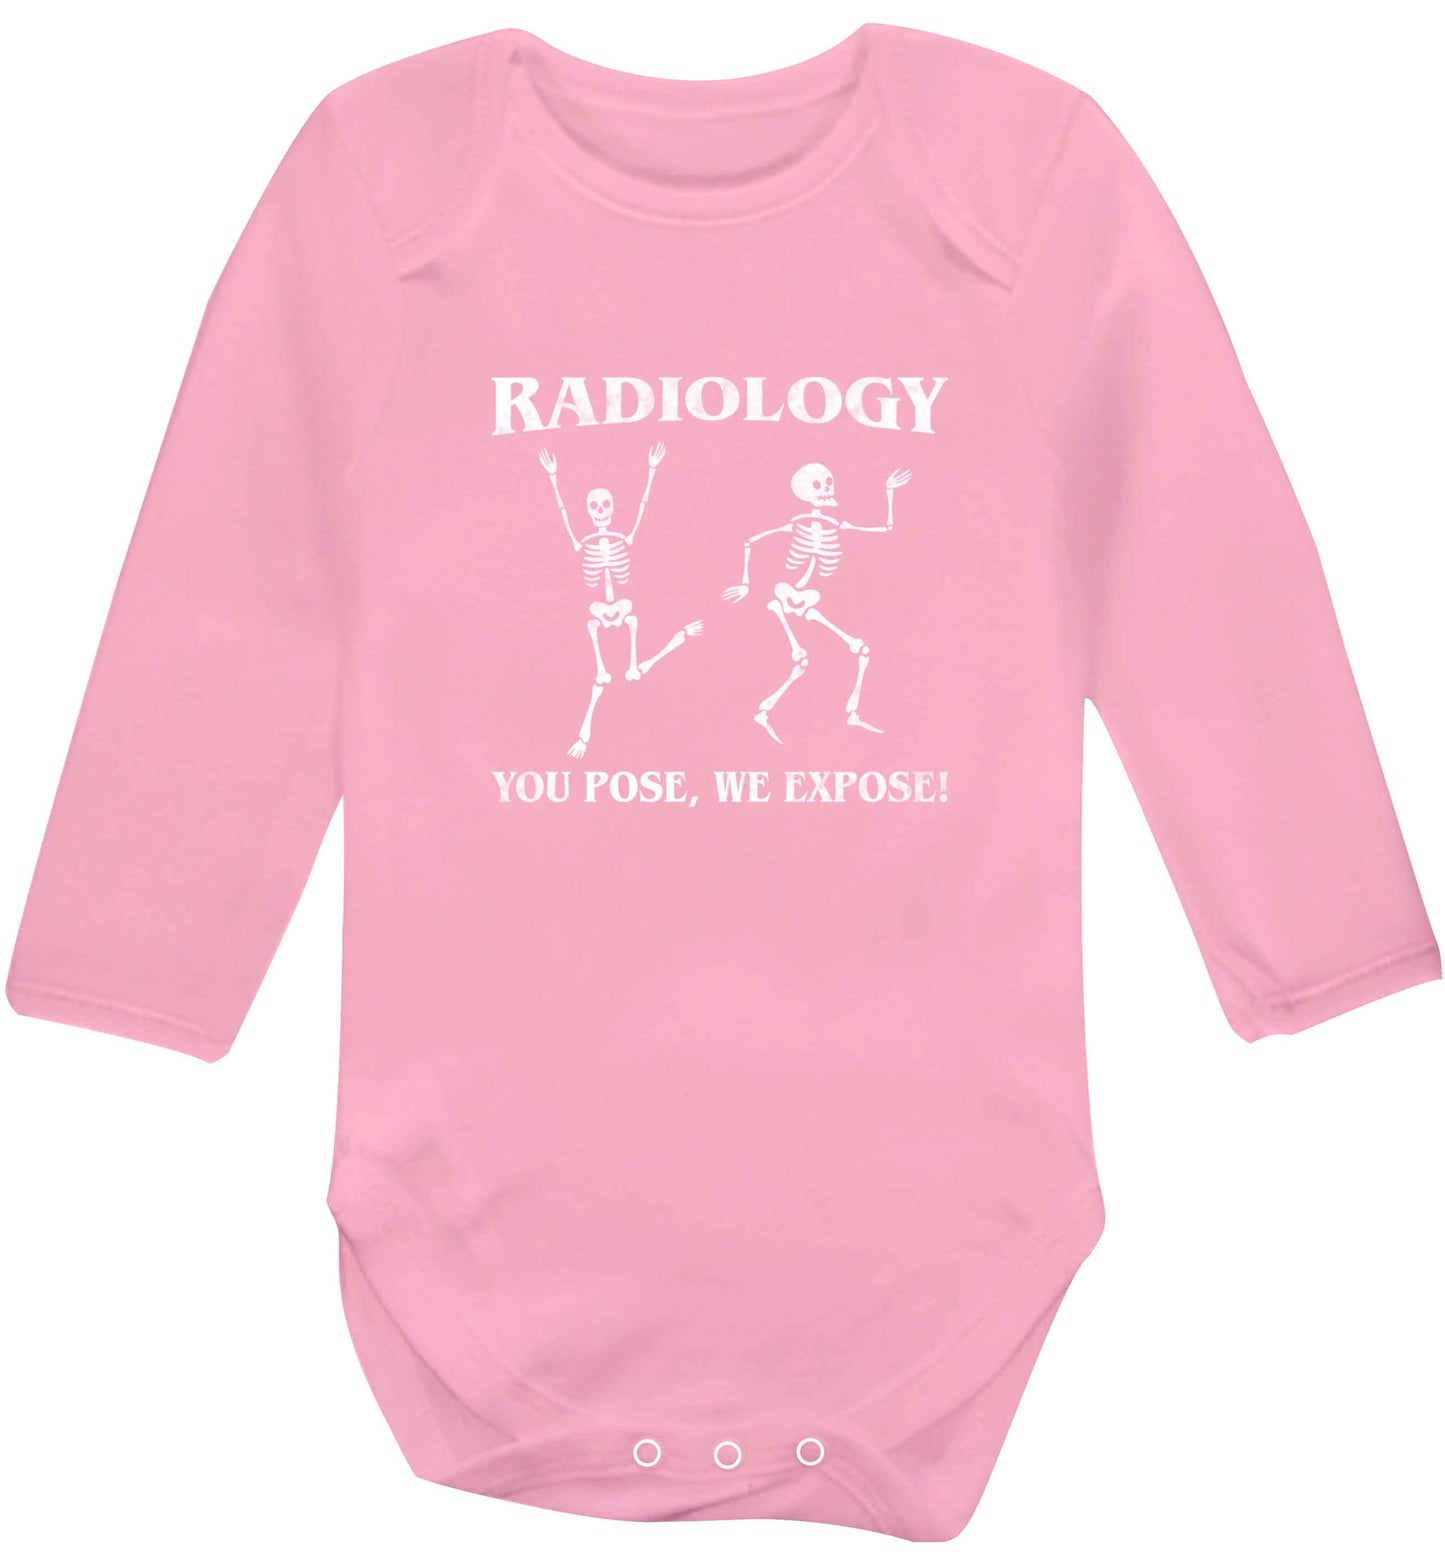 Radiology you pose we expose baby vest long sleeved pale pink 6-12 months